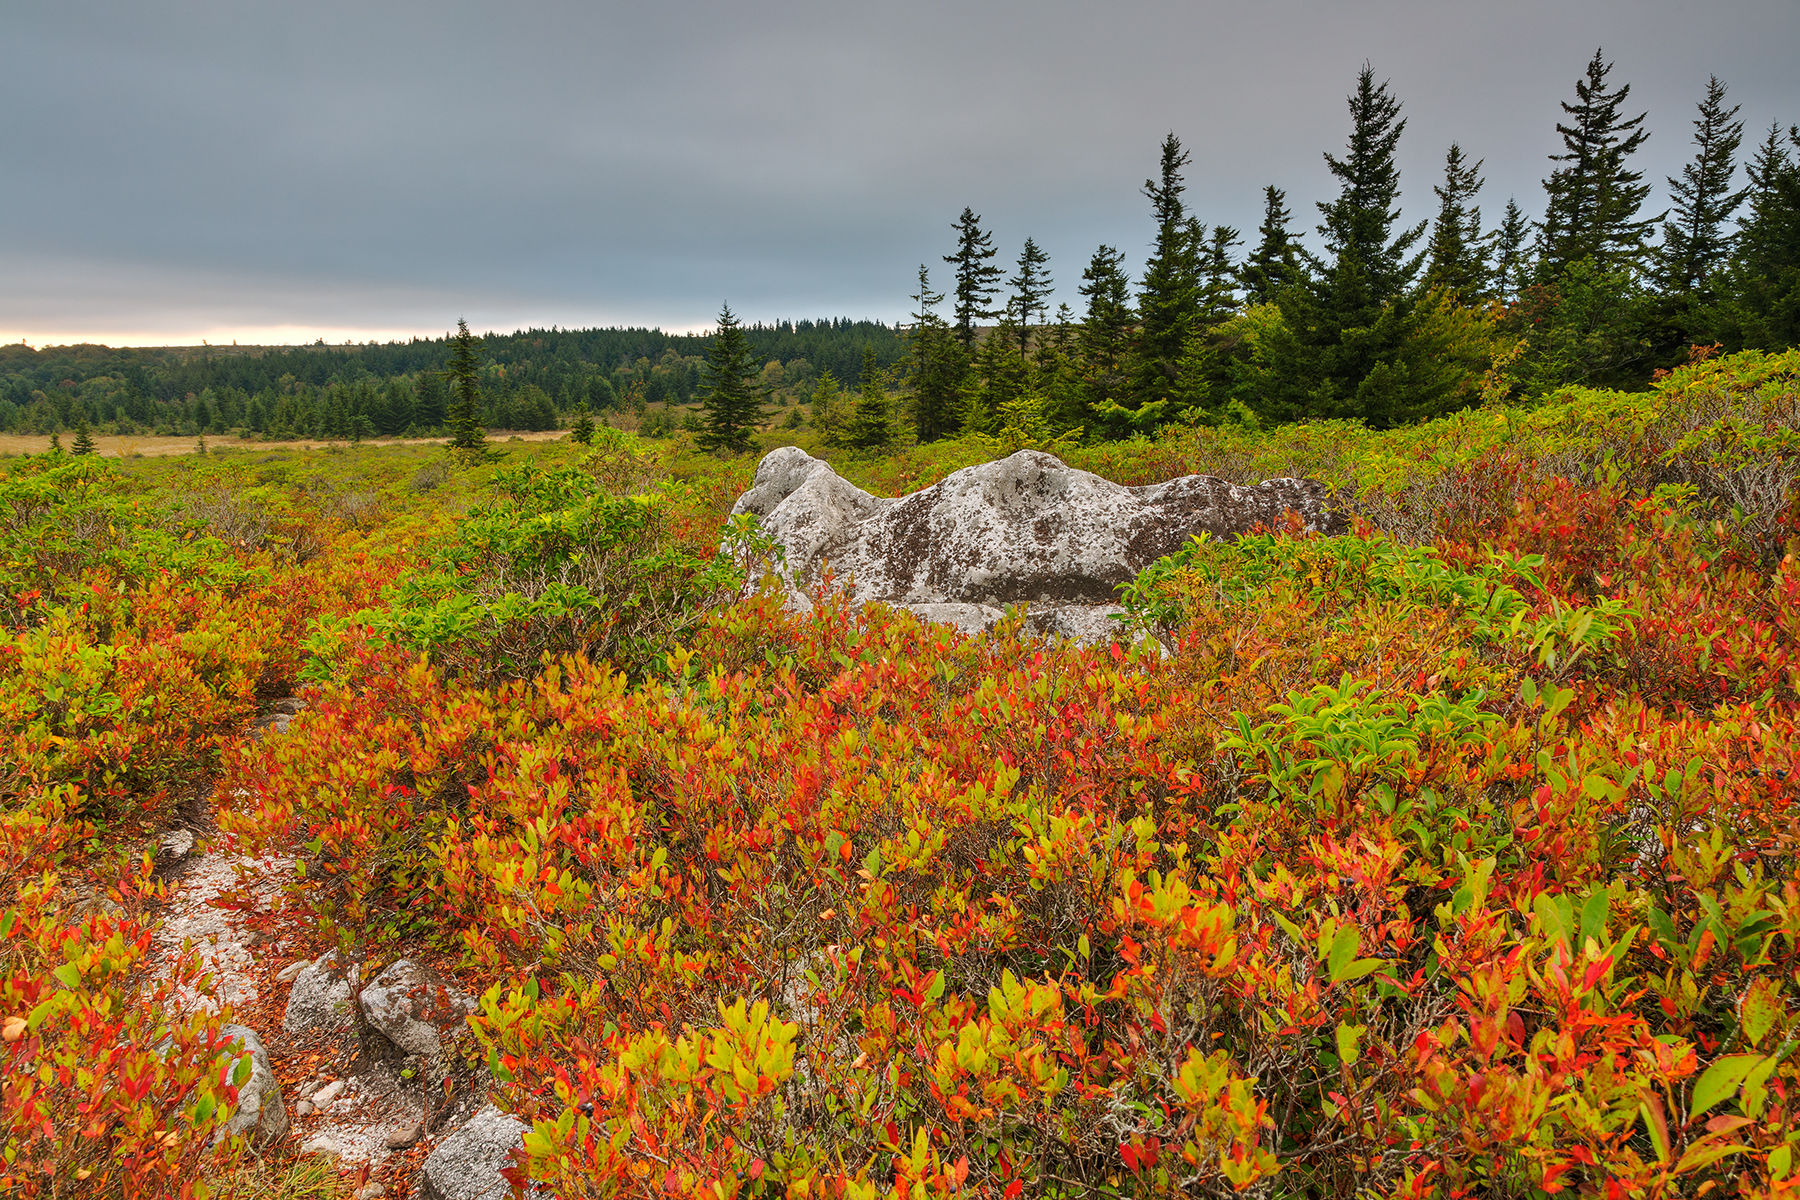 Cloudy dolly sods sunset - hdr photo